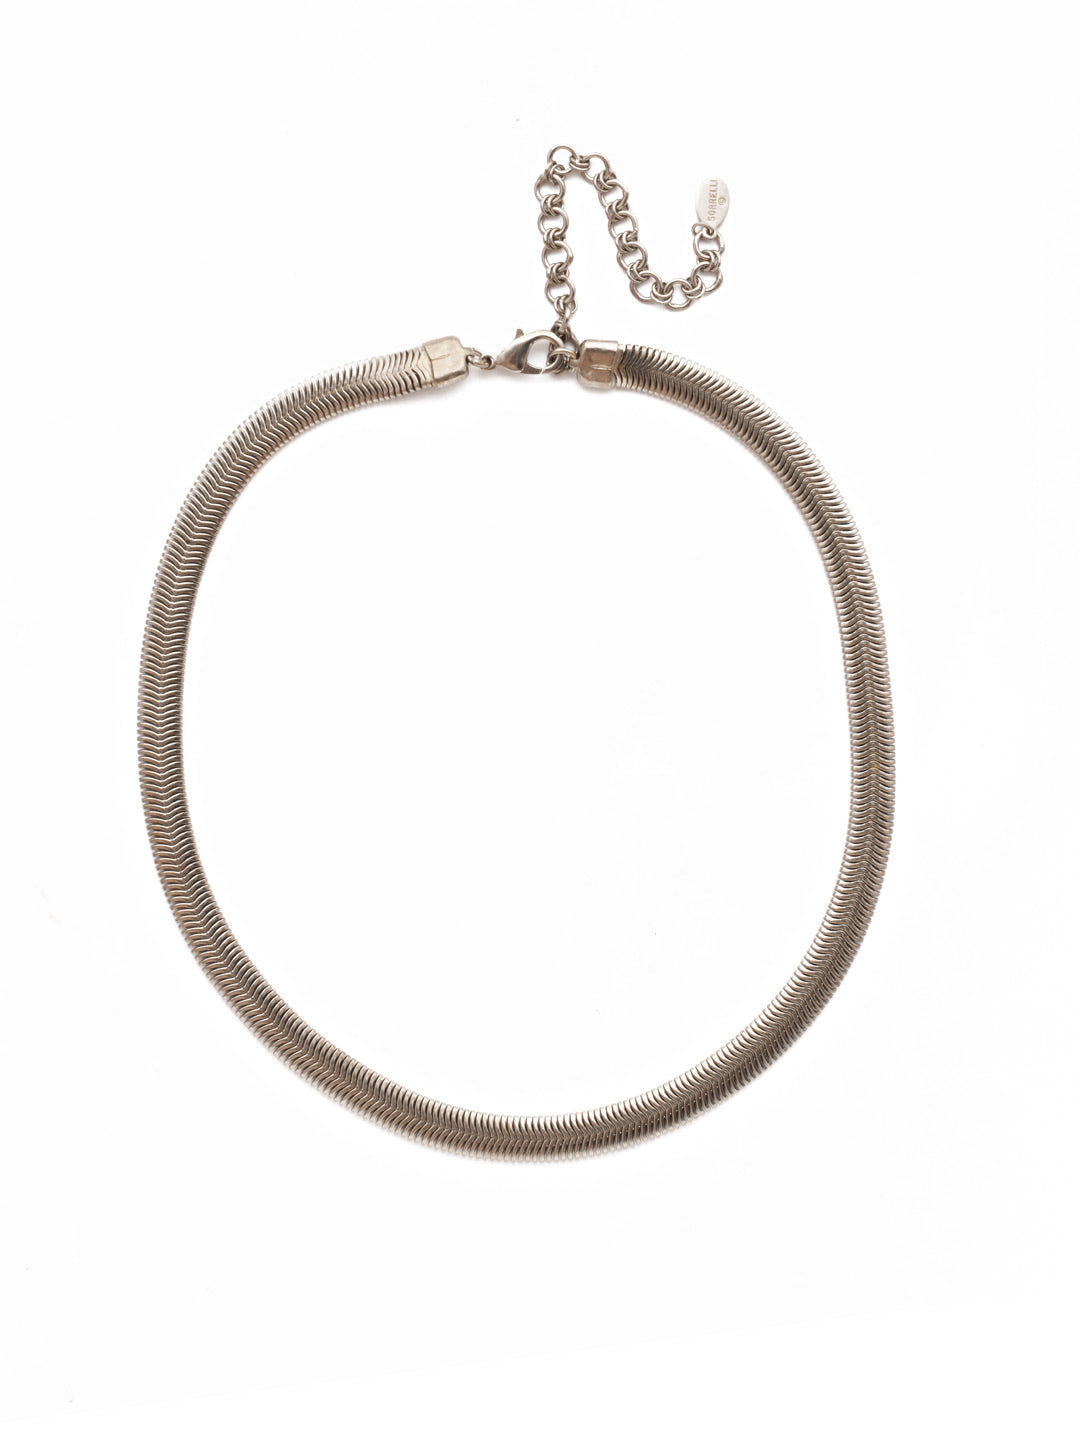 Juna Tennis Necklace - 4NES10ASCRY - <p>Go big and bold with metallic detail in our Juna Tennis Necklace. It's an essential, dynamic staple piece. From Sorrelli's Crystal collection in our Antique Silver-tone finish.</p>